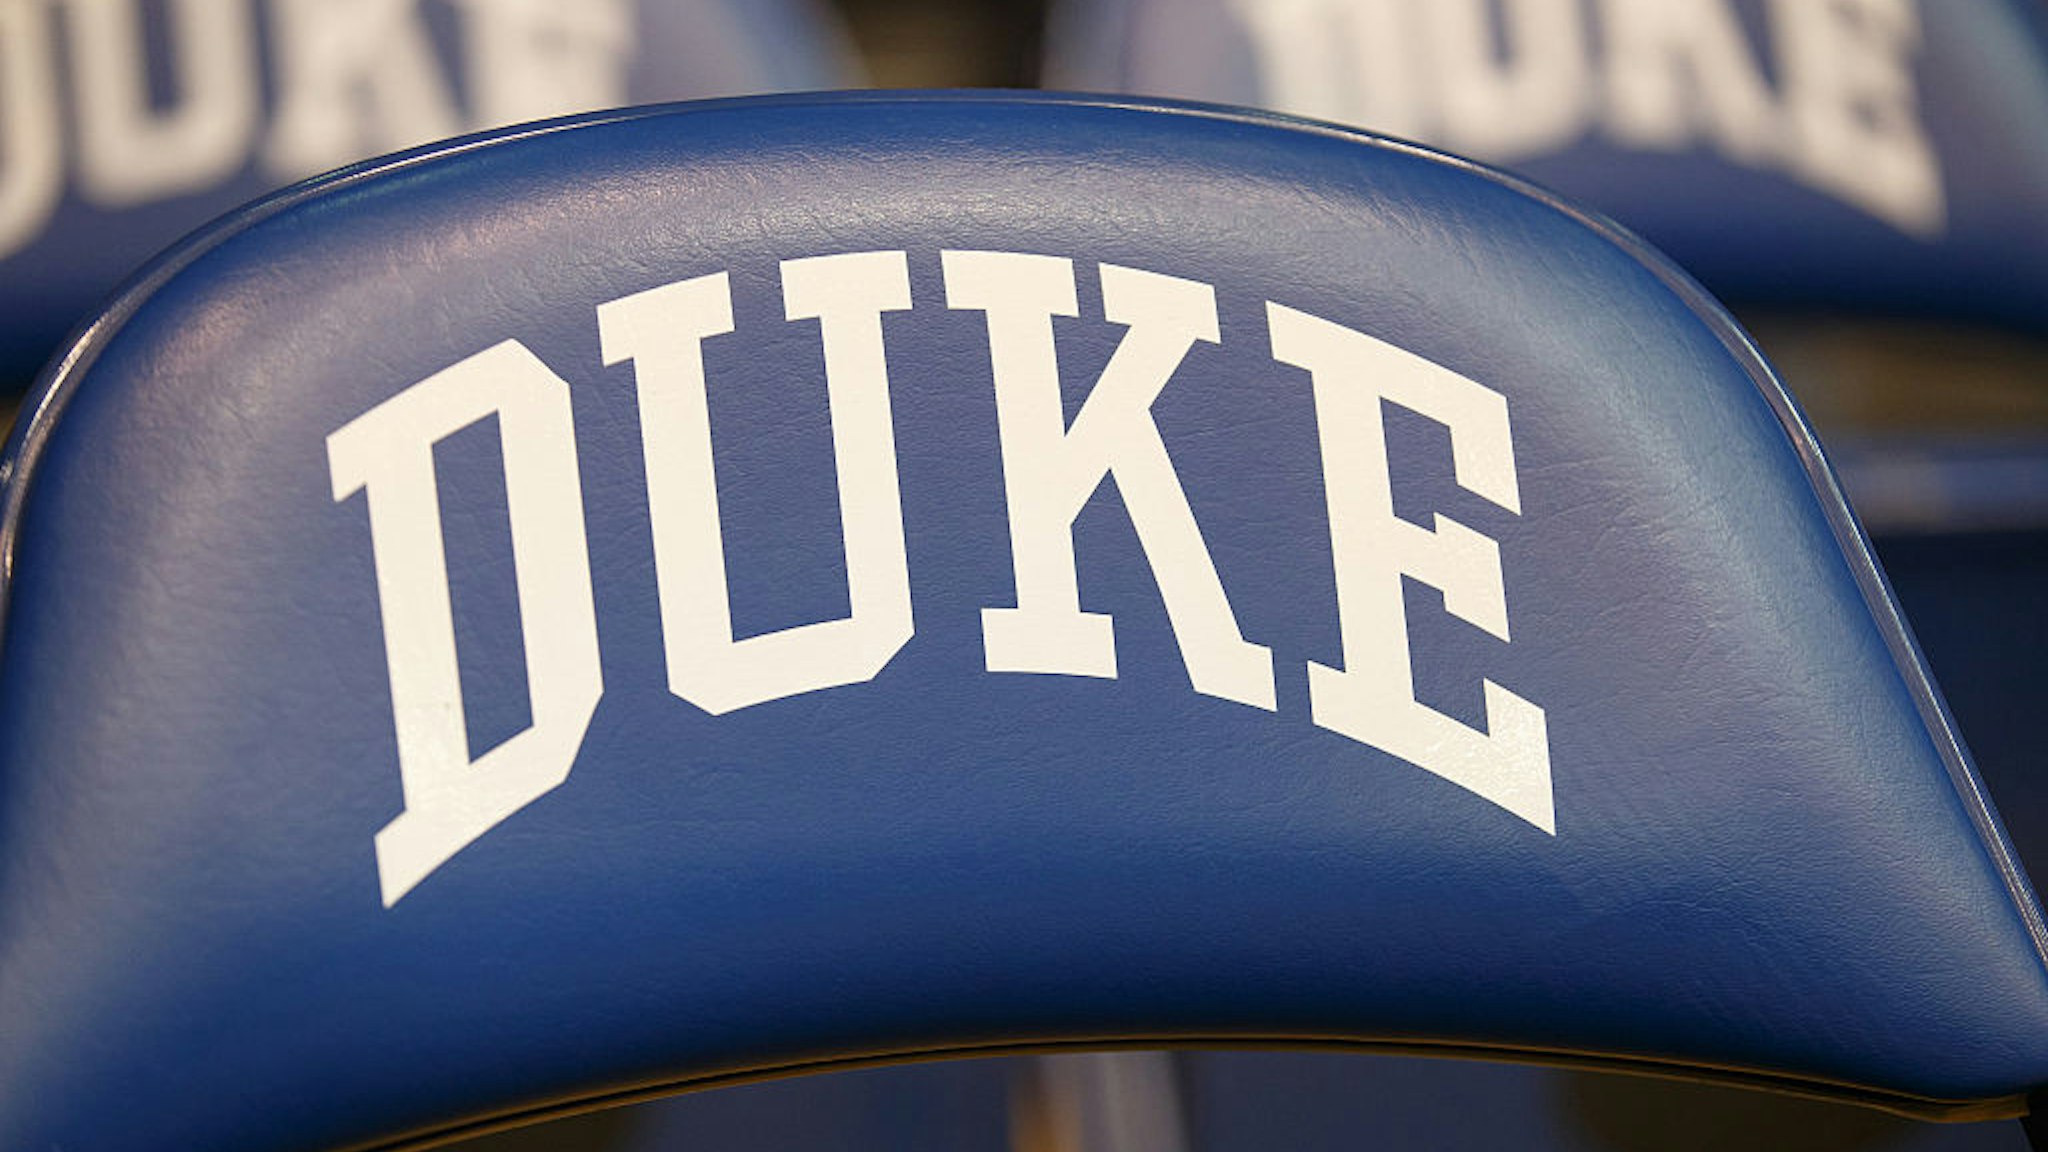 DURHAM, NC - DECEMBER 05: A general view of a Duke Blue Devils bench seat and logo during a game against the Buffalo Bulls during a 59-82 Duke Blue Devils win on December 05, 2015 at Cameron Indoor Stadium in Durham, North Carolina. (Photo by Peyton Williams/Getty Images)